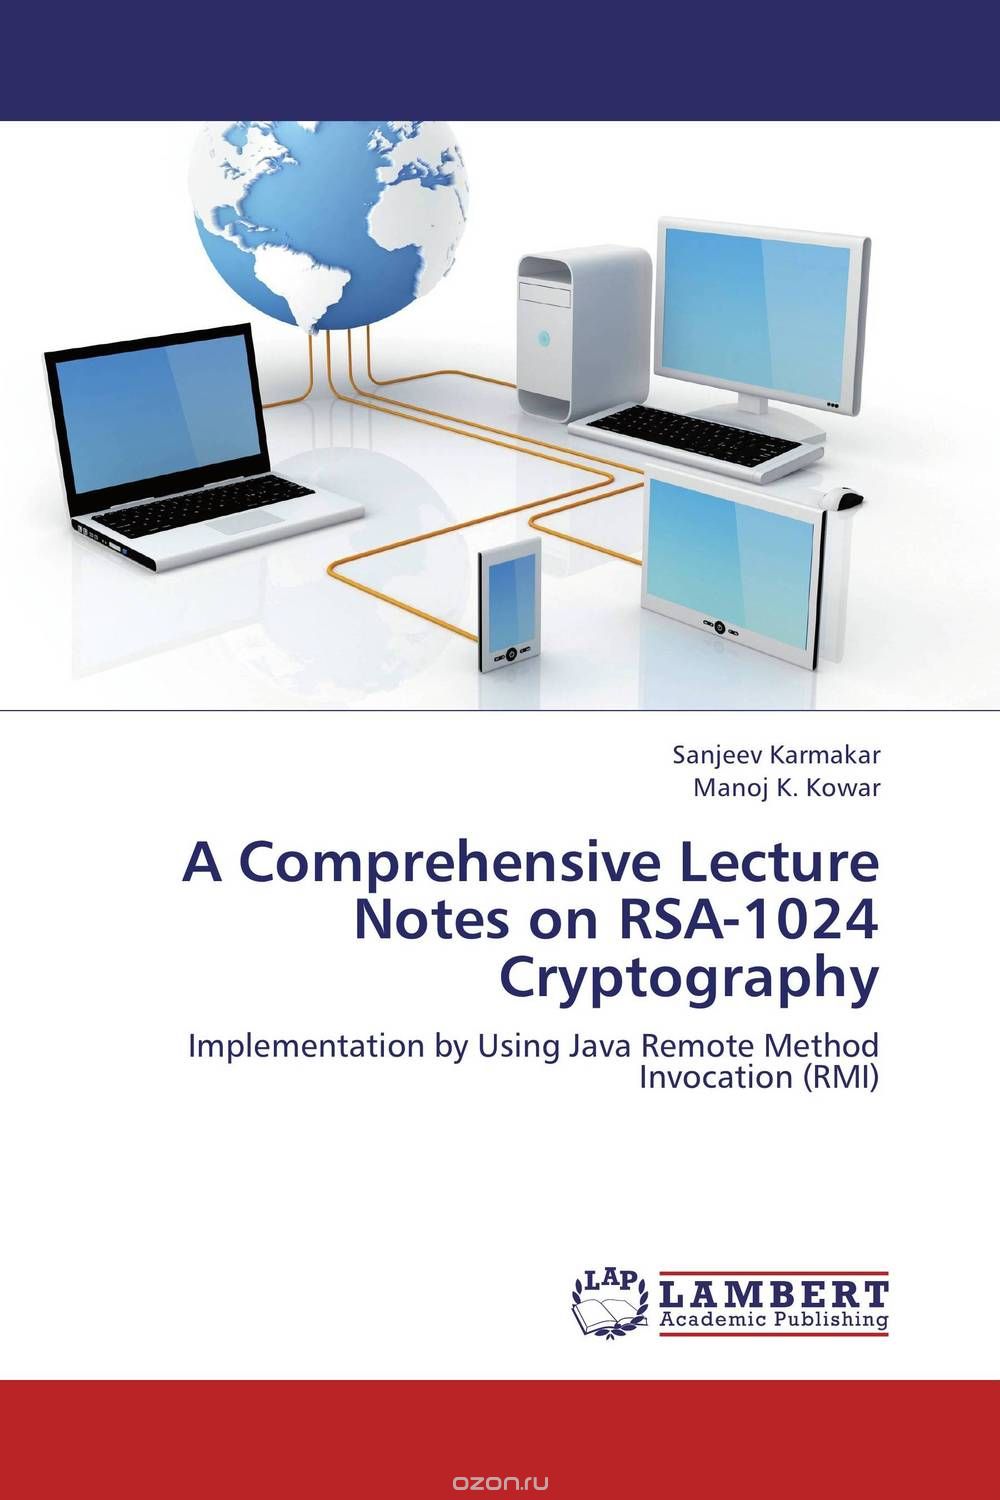 Скачать книгу "A Comprehensive Lecture Notes on RSA-1024 Cryptography"